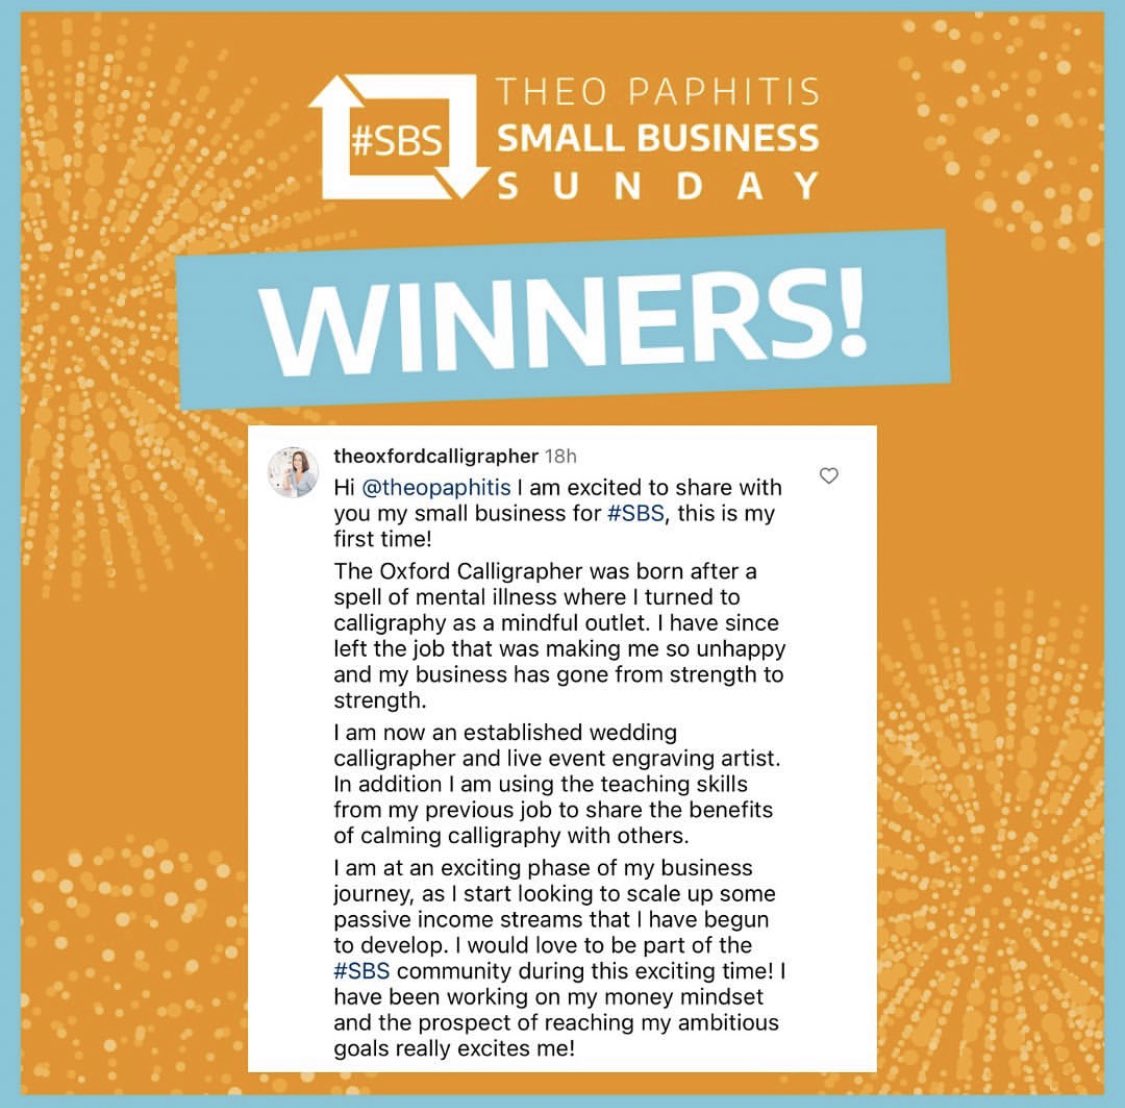 This exciting thing happened last night! I have become a #SBSwinner and am really looking forward to being part of the #SBS community! Thank you @TheoPaphitis and @TheSBS_Crew 

See you at 8.30!